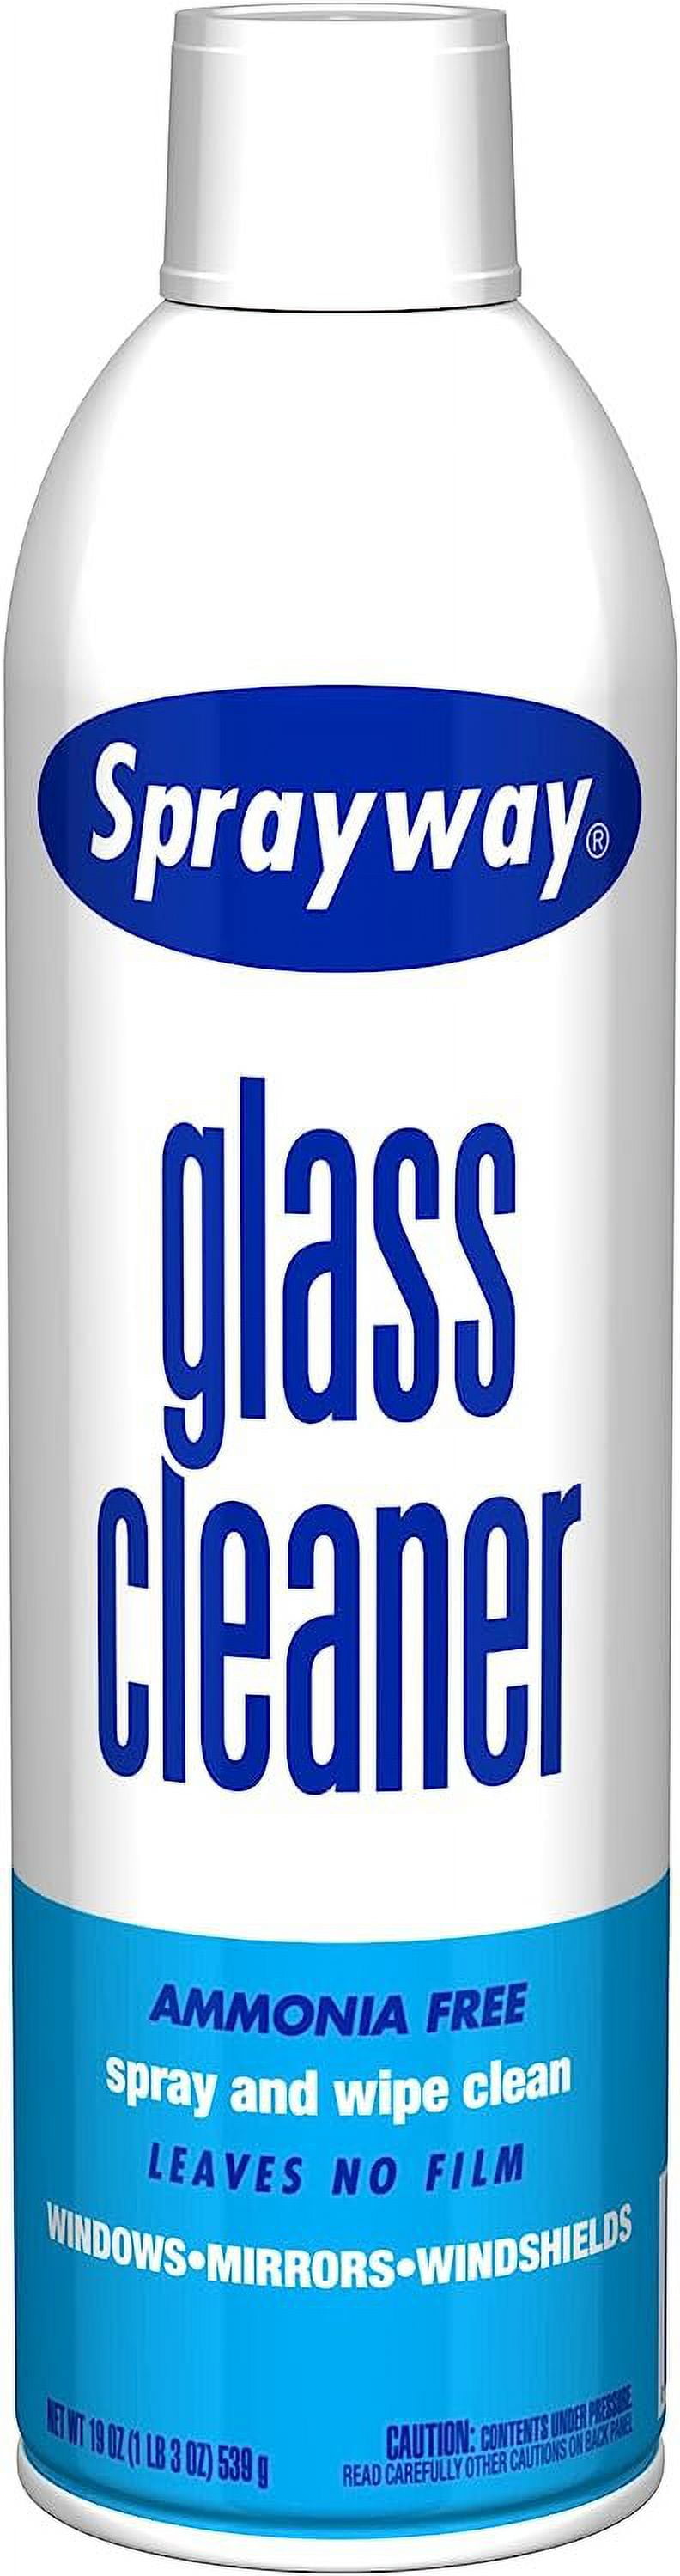 SprayWay SW050-12 Glass Cleaner, 19 oz, Pack of 12